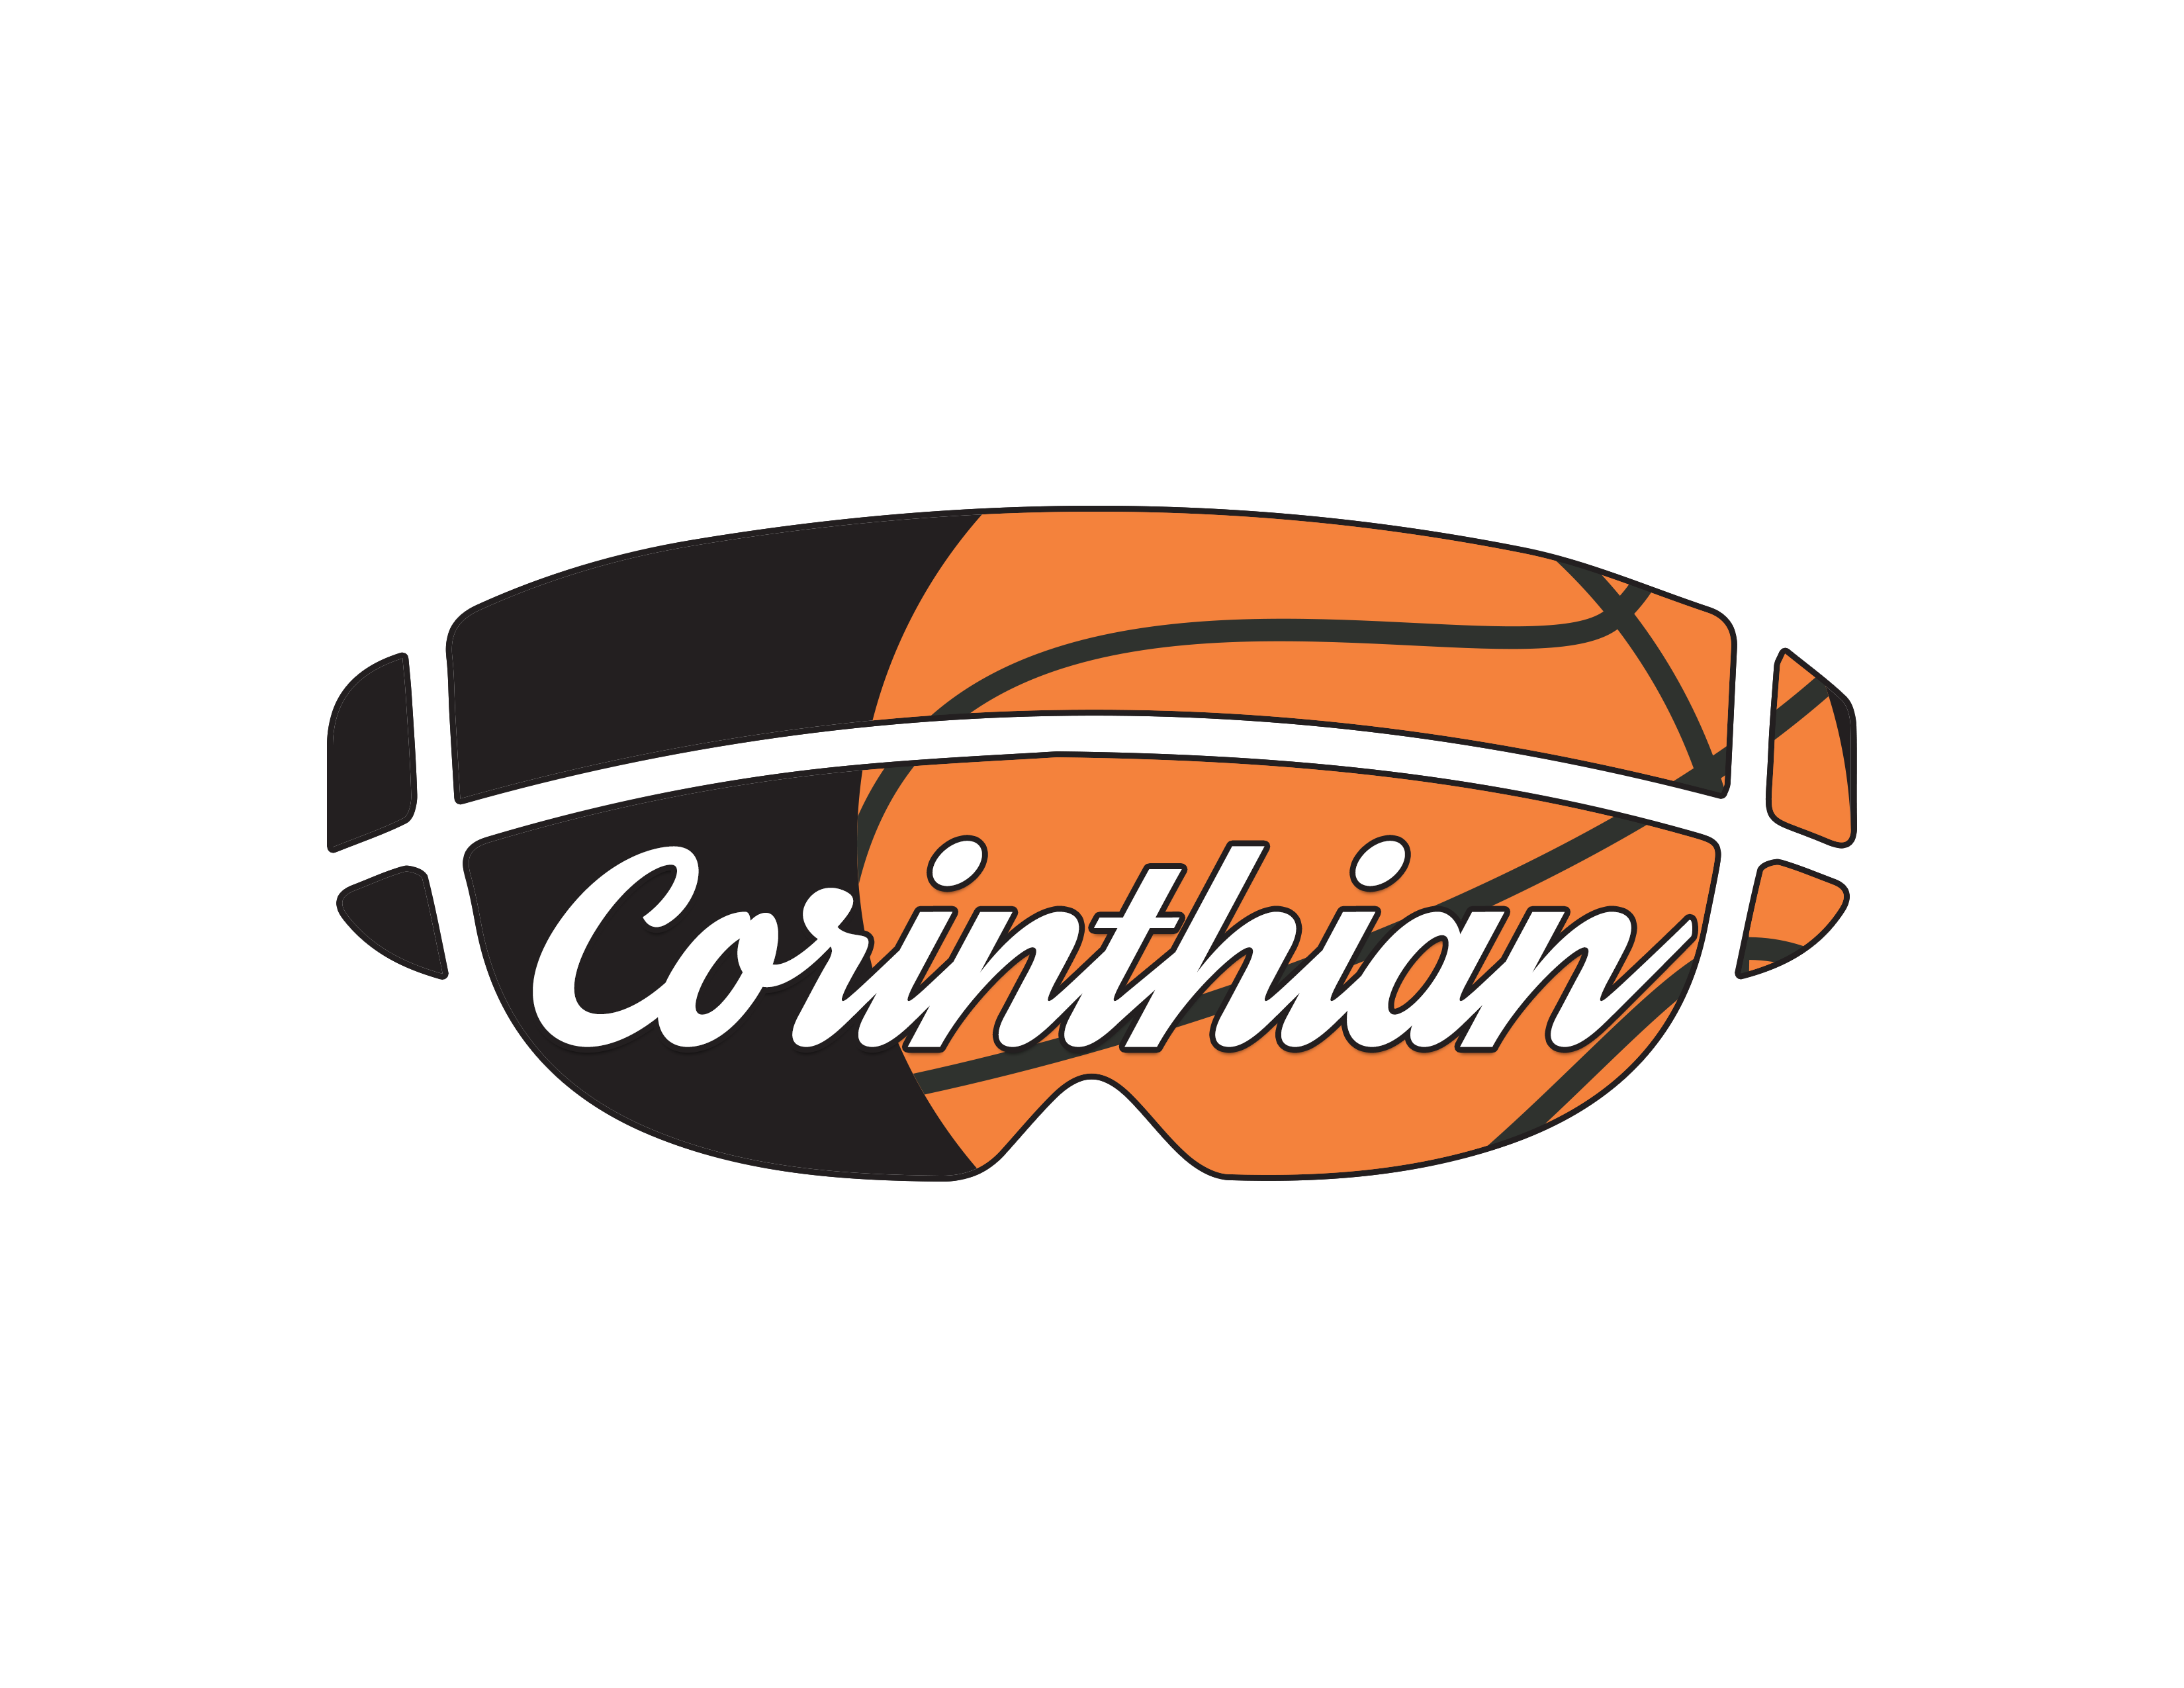 Corinthian is a great help to all athletes of any sport and will help them improve even if they can’t go out to the field that day.